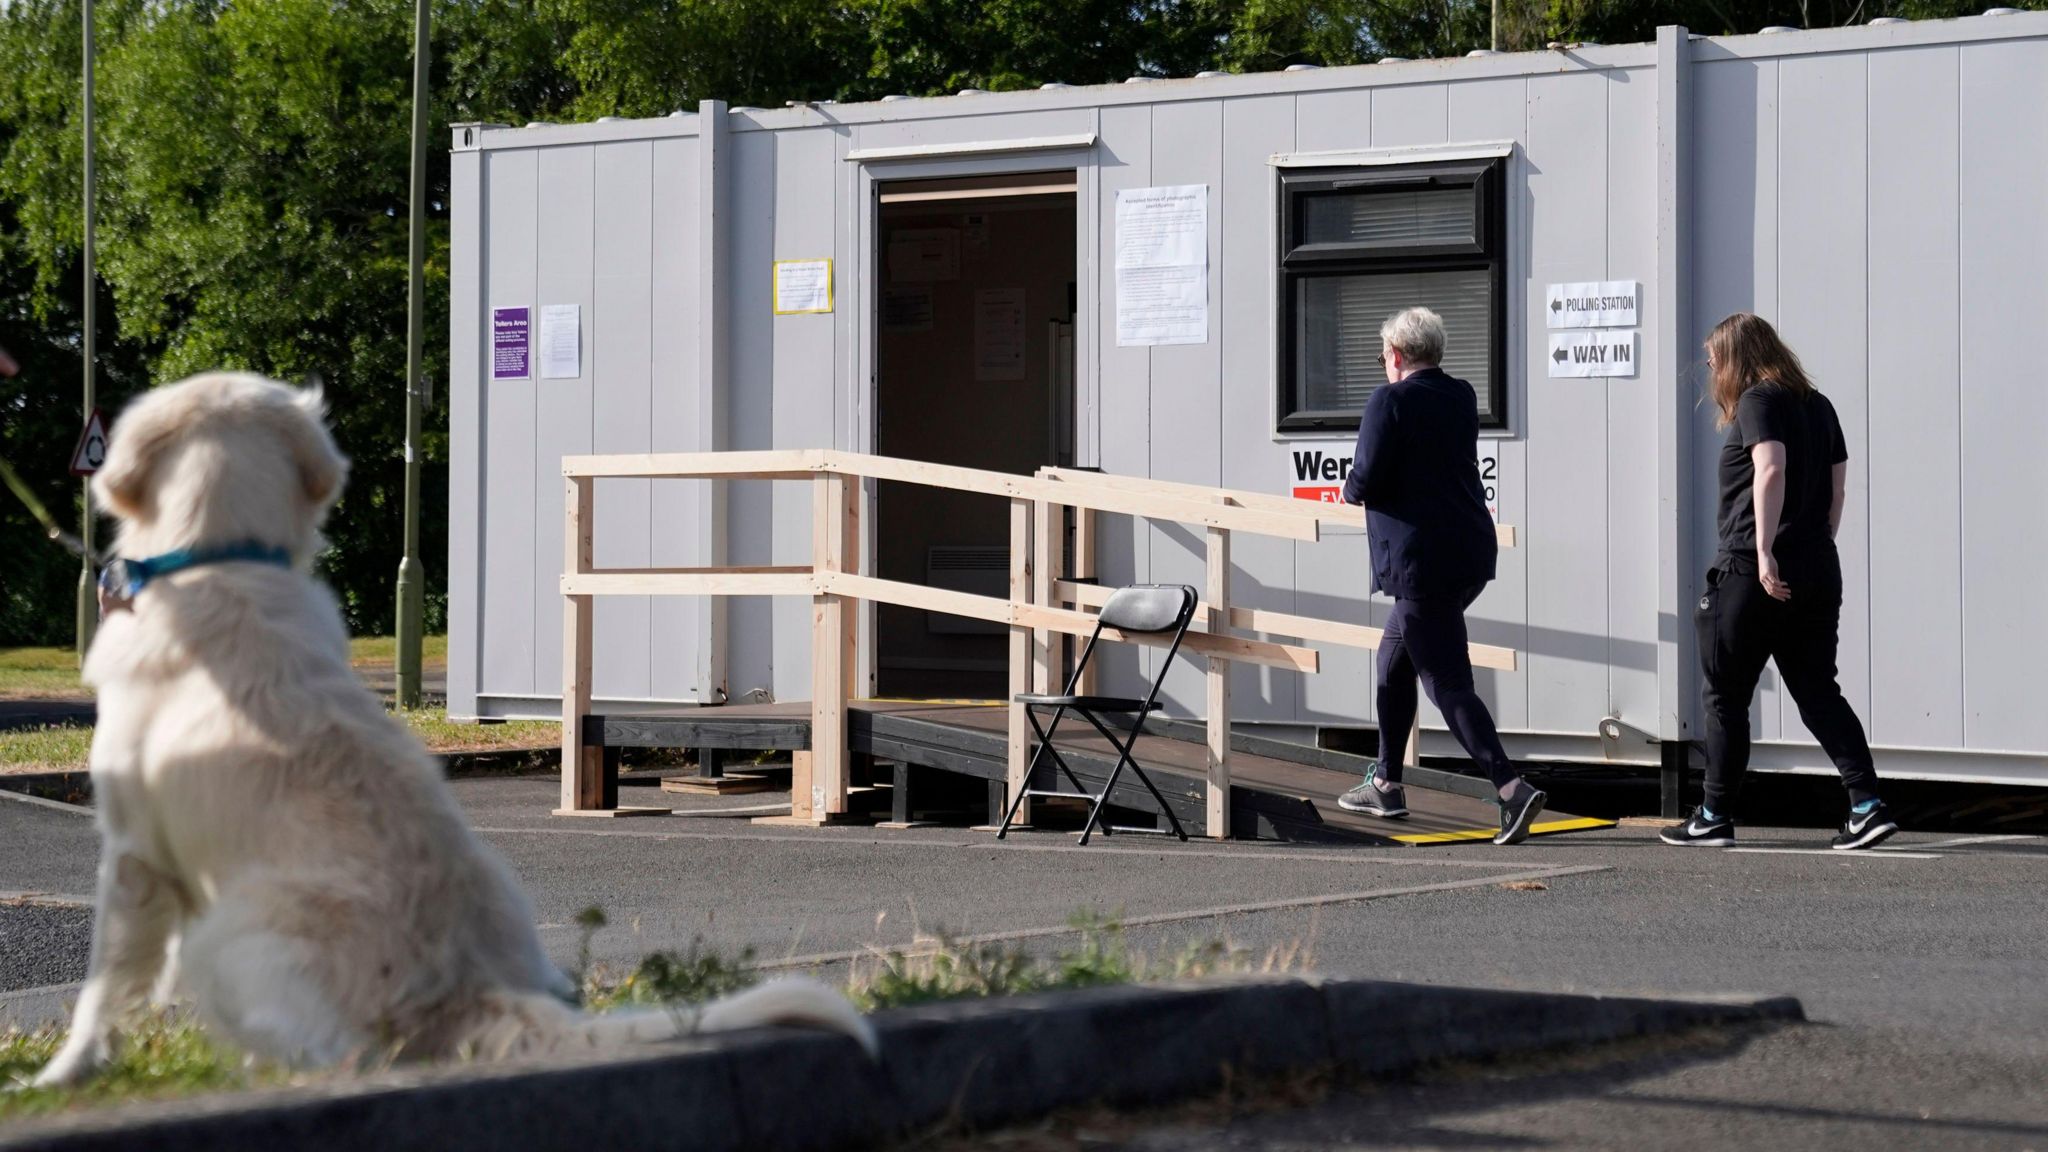 People arrive to cast their vote at a polling station in a temporary building in Andover, Hampshire. The back of a white dog can be seen as it is staring at the people walking into the polling station